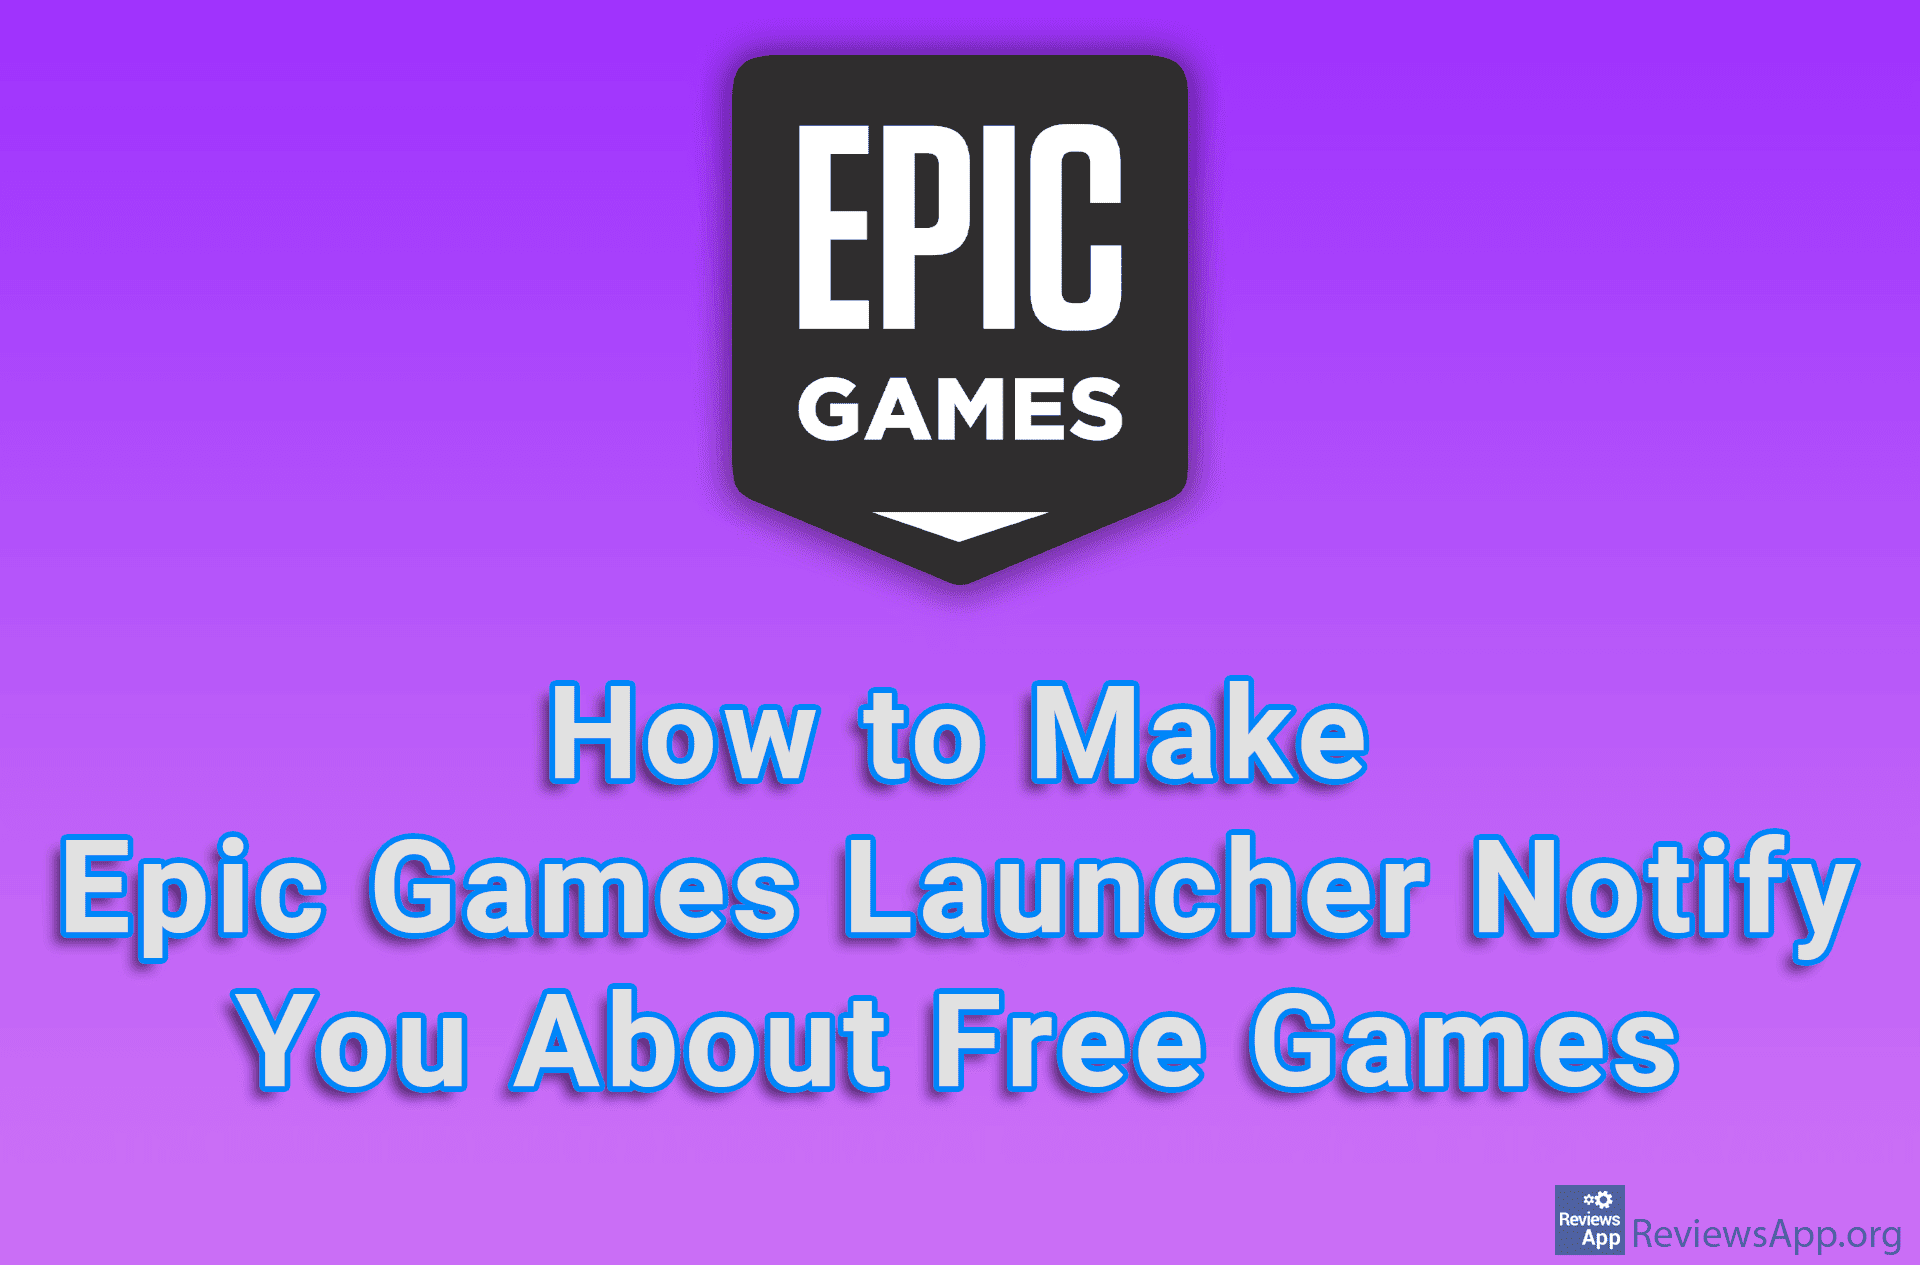 How to Make Epic Games Launcher Notify You About Free Games